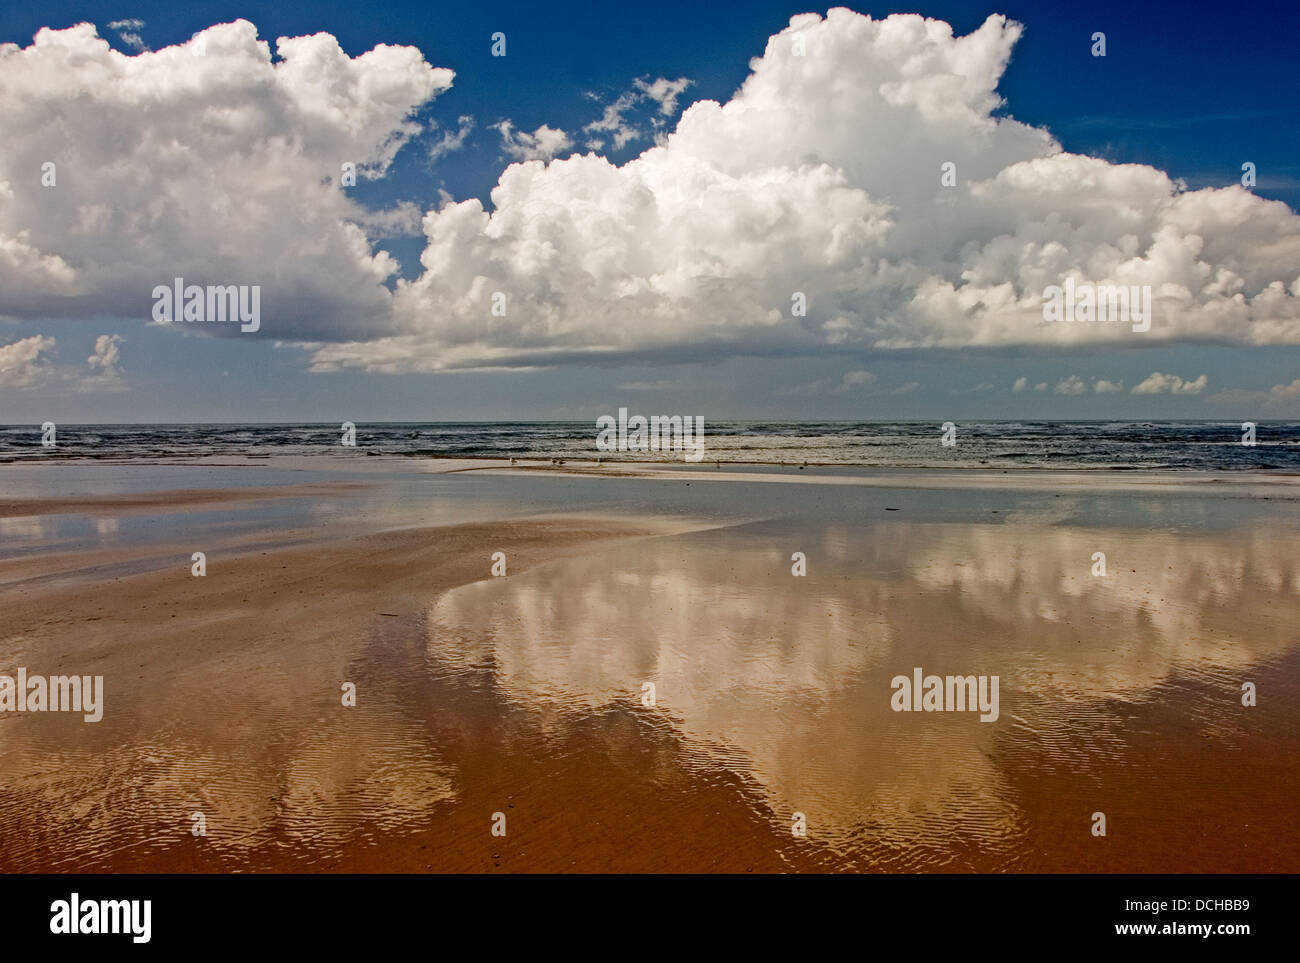 Abstract images of clouds reflected in wet sand. Stock Photo